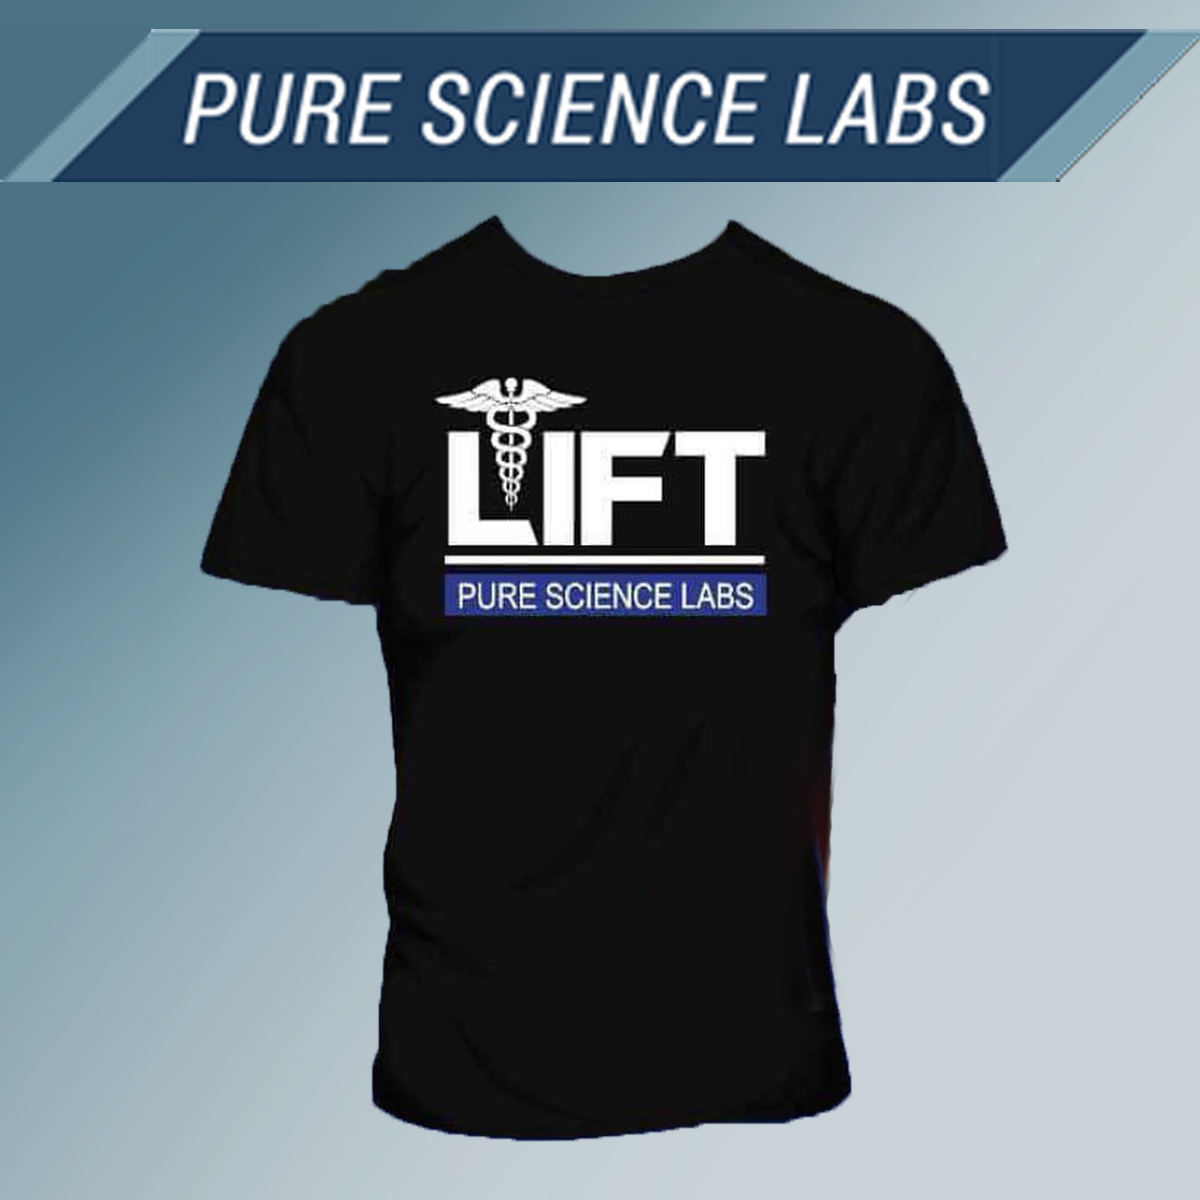  Pure Science Labs T Shirt  Proteinlab Malaysia  Sport 